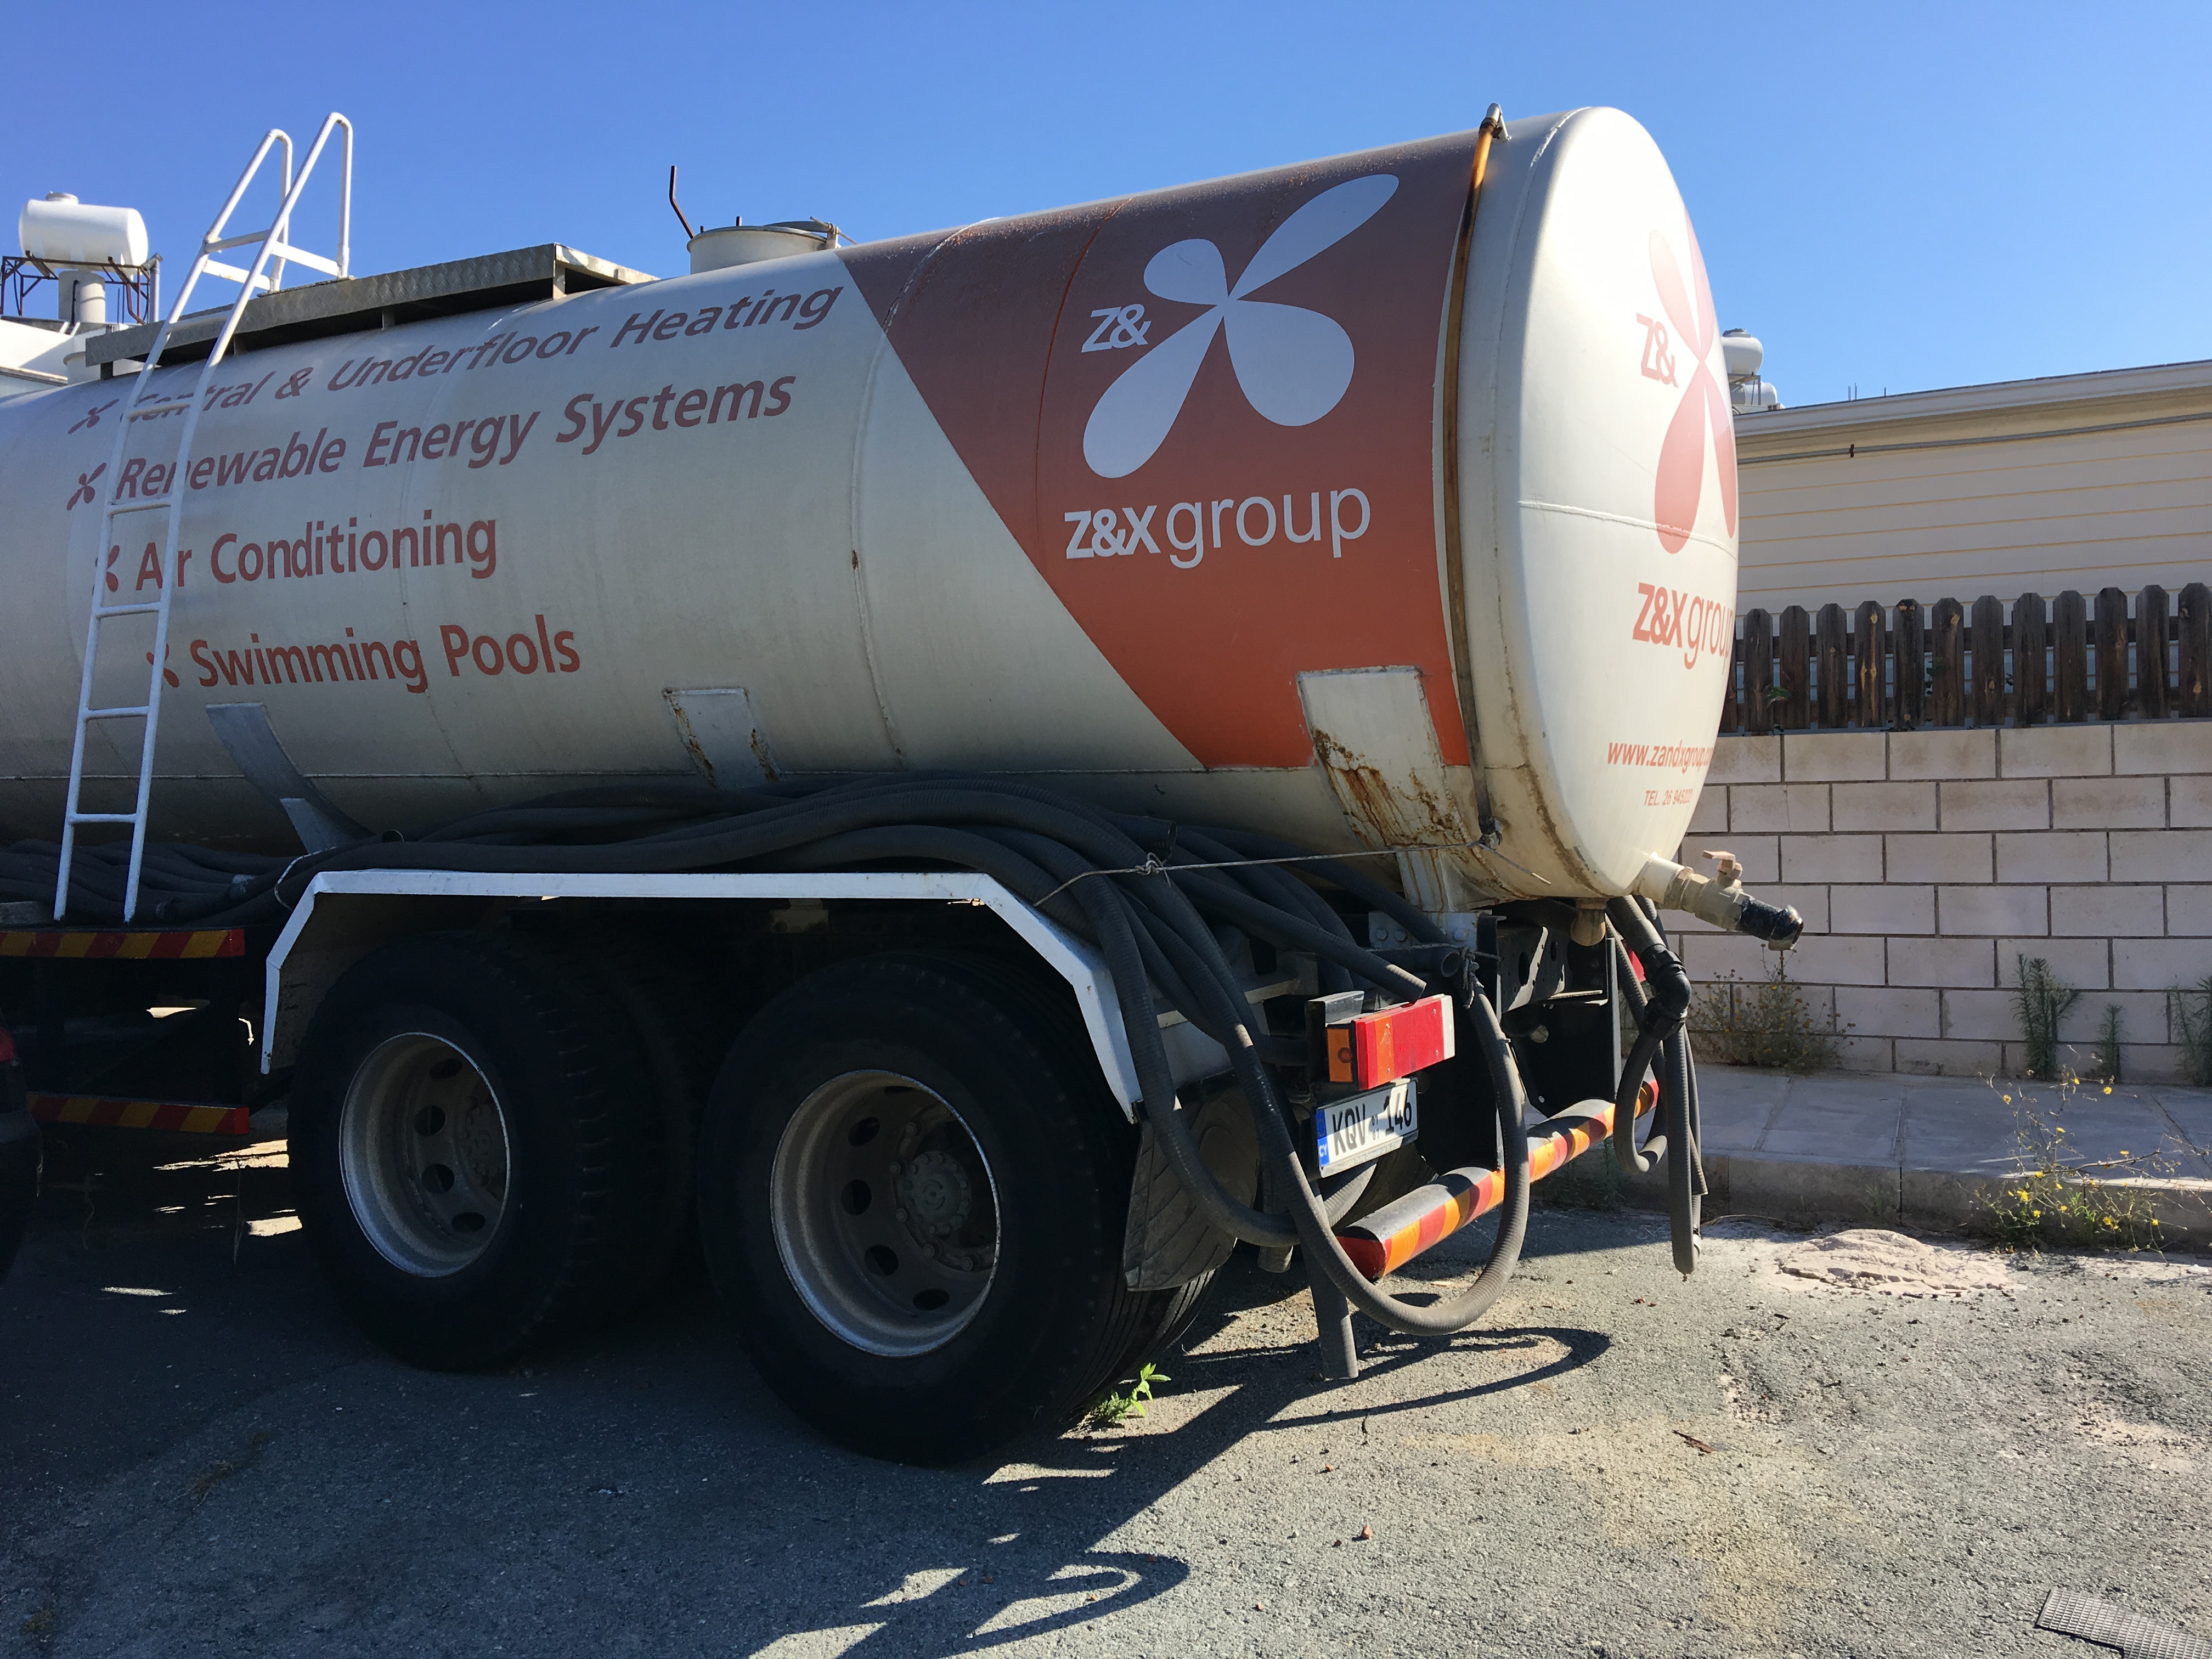 water tanker for sale